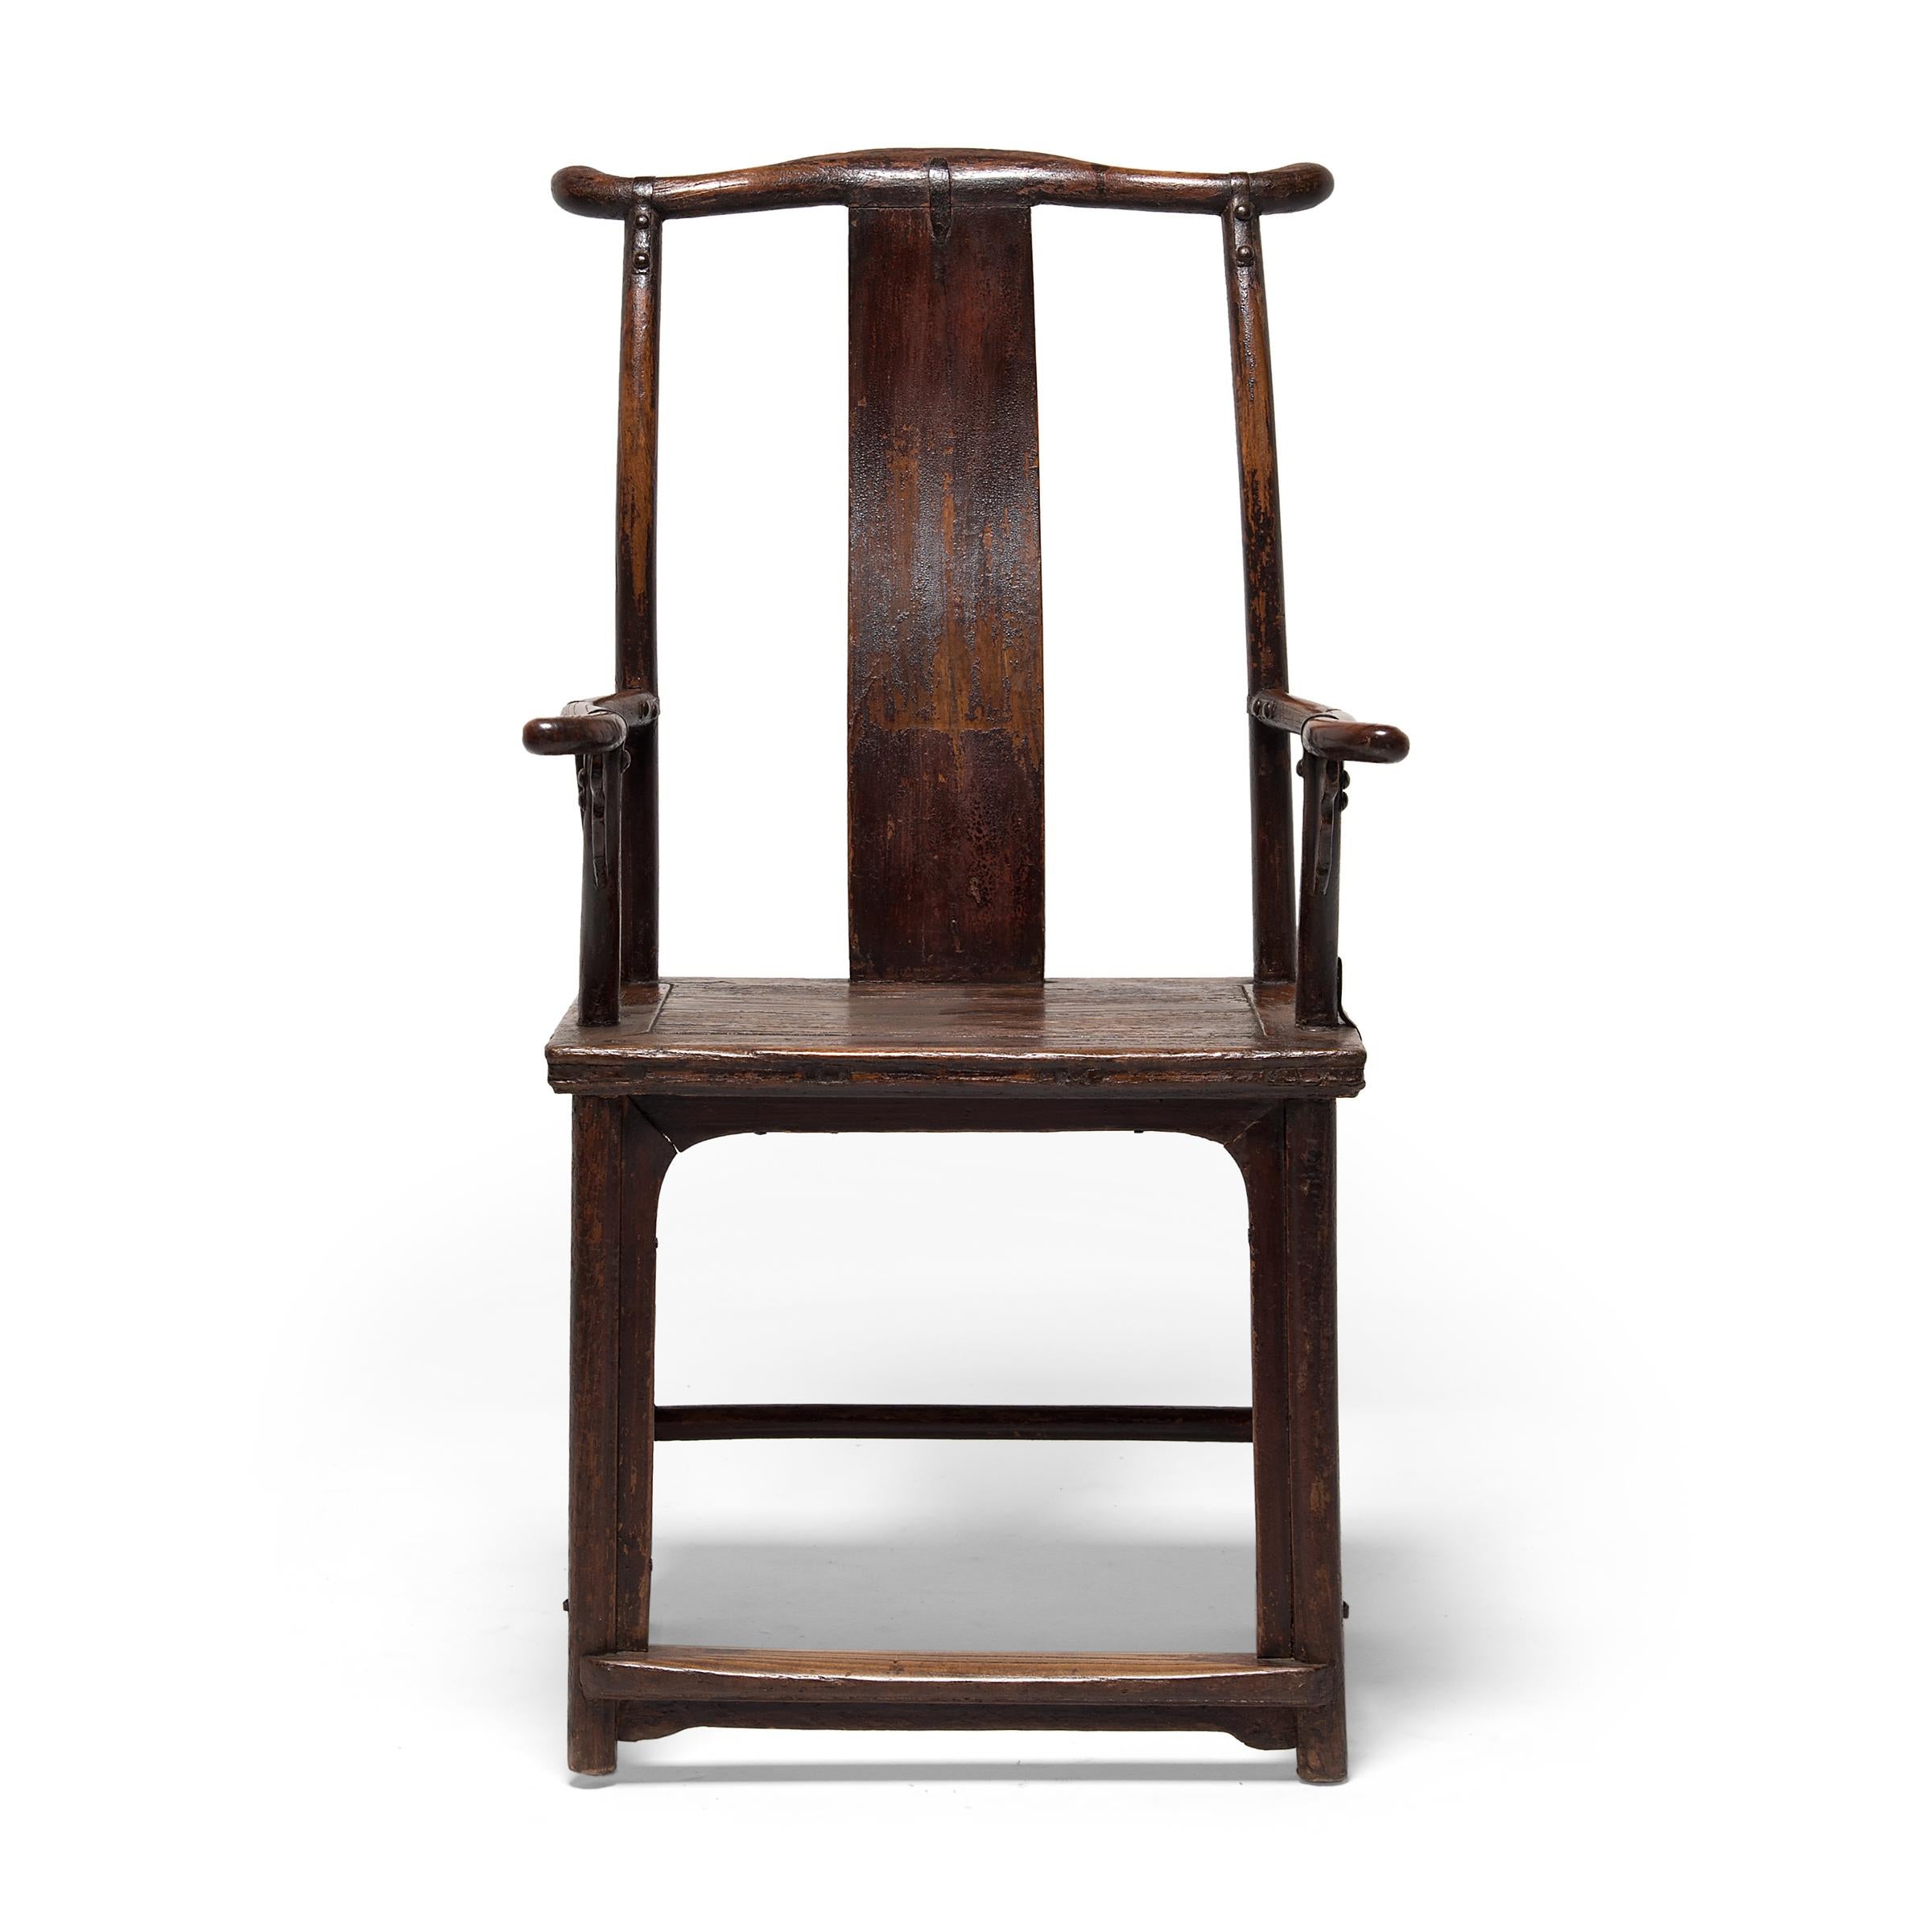 Qing Pair of Chinese Yokeback Chairs, c. 1750 For Sale